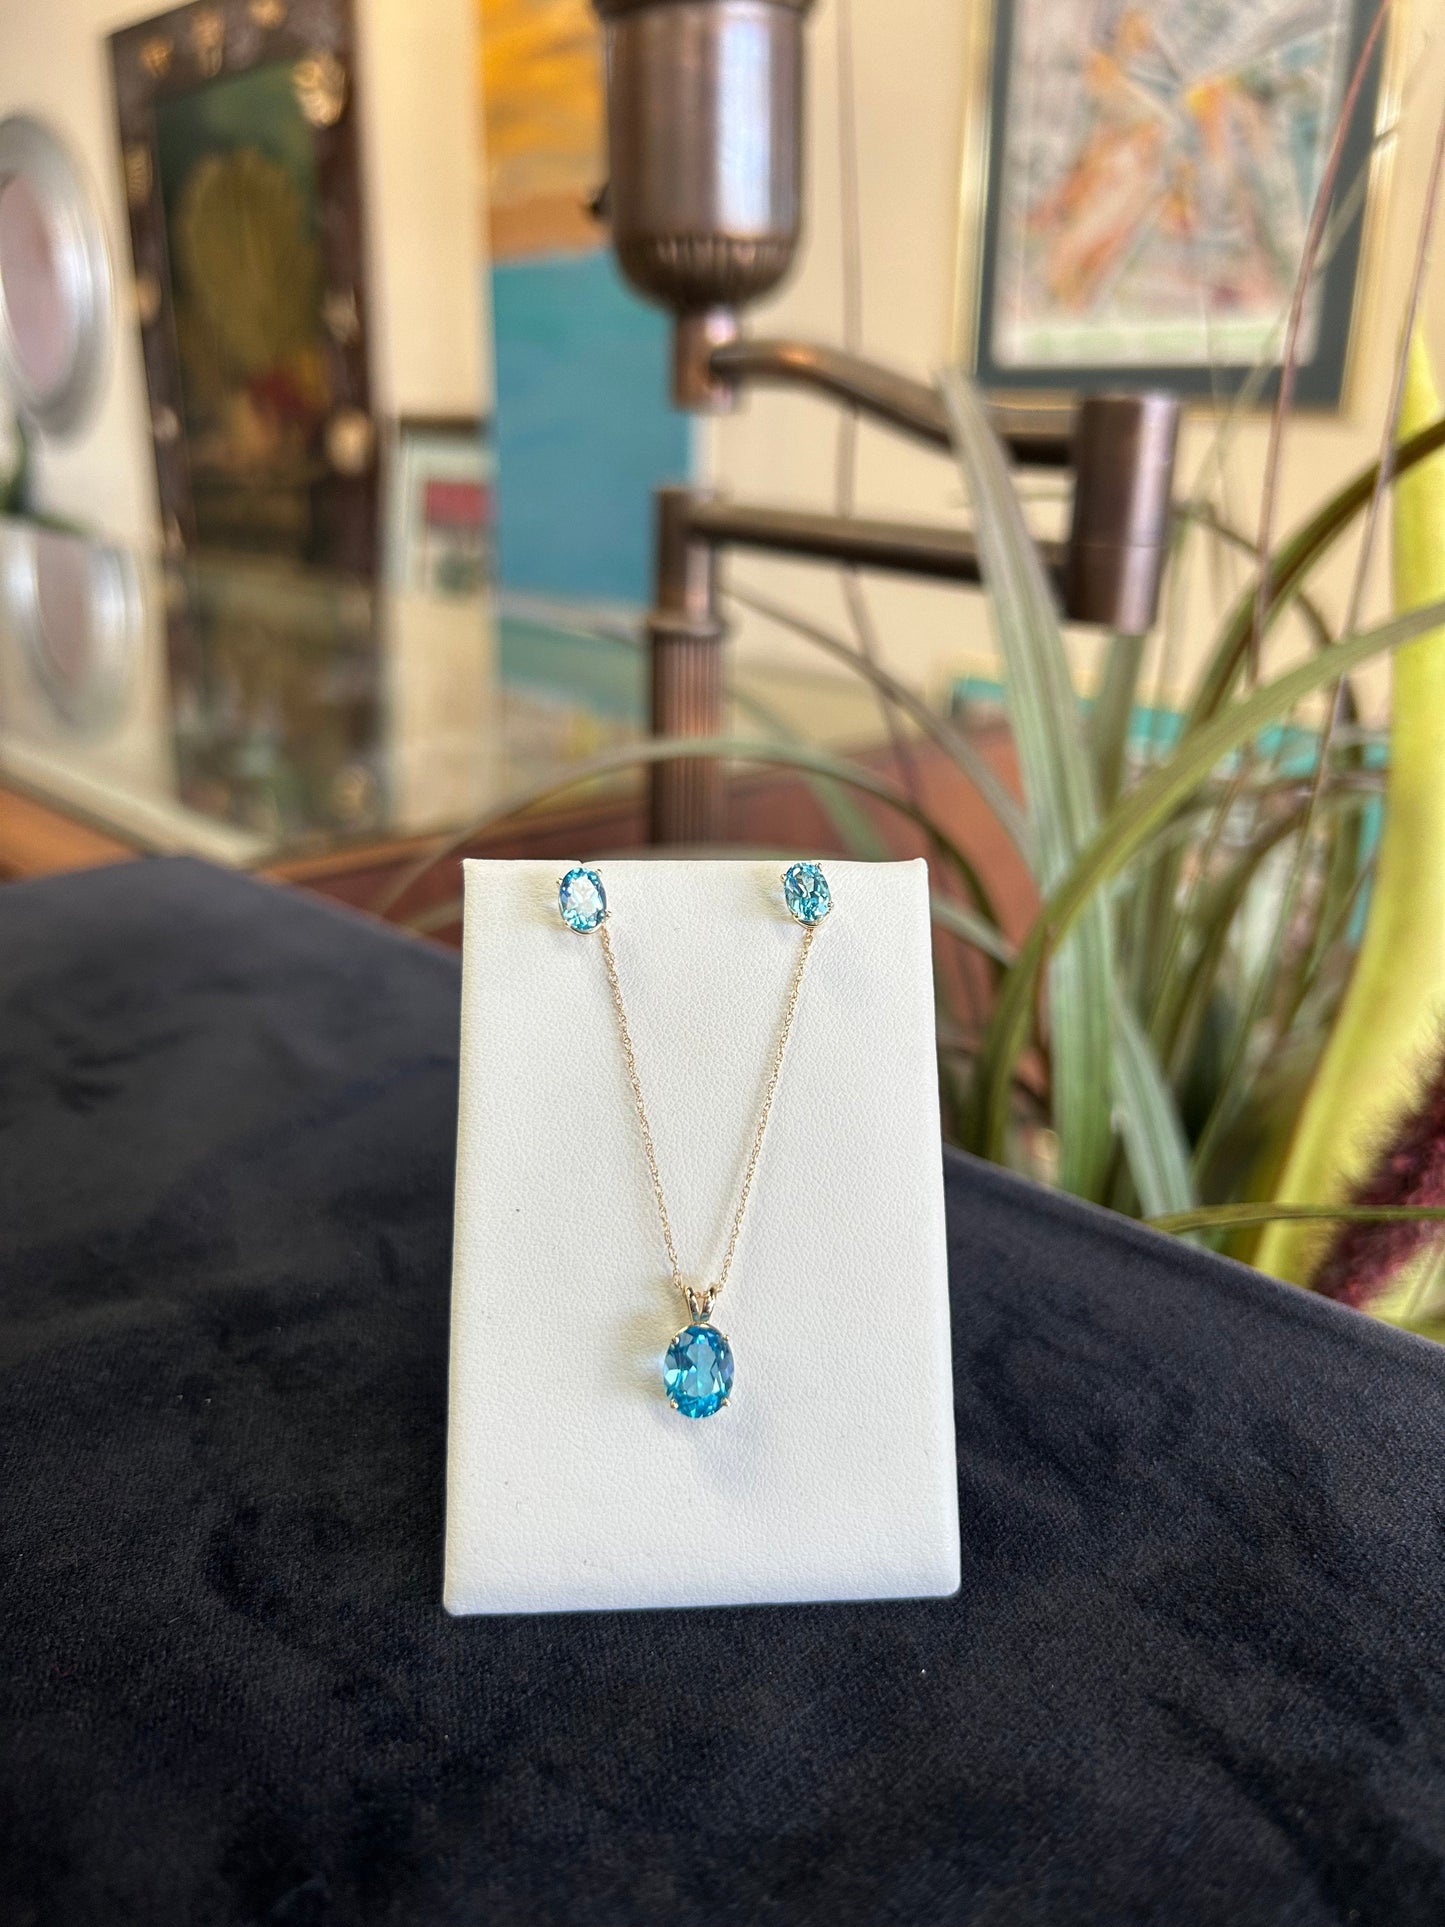 Blue topaz - yellow gold - earrings - necklace - set